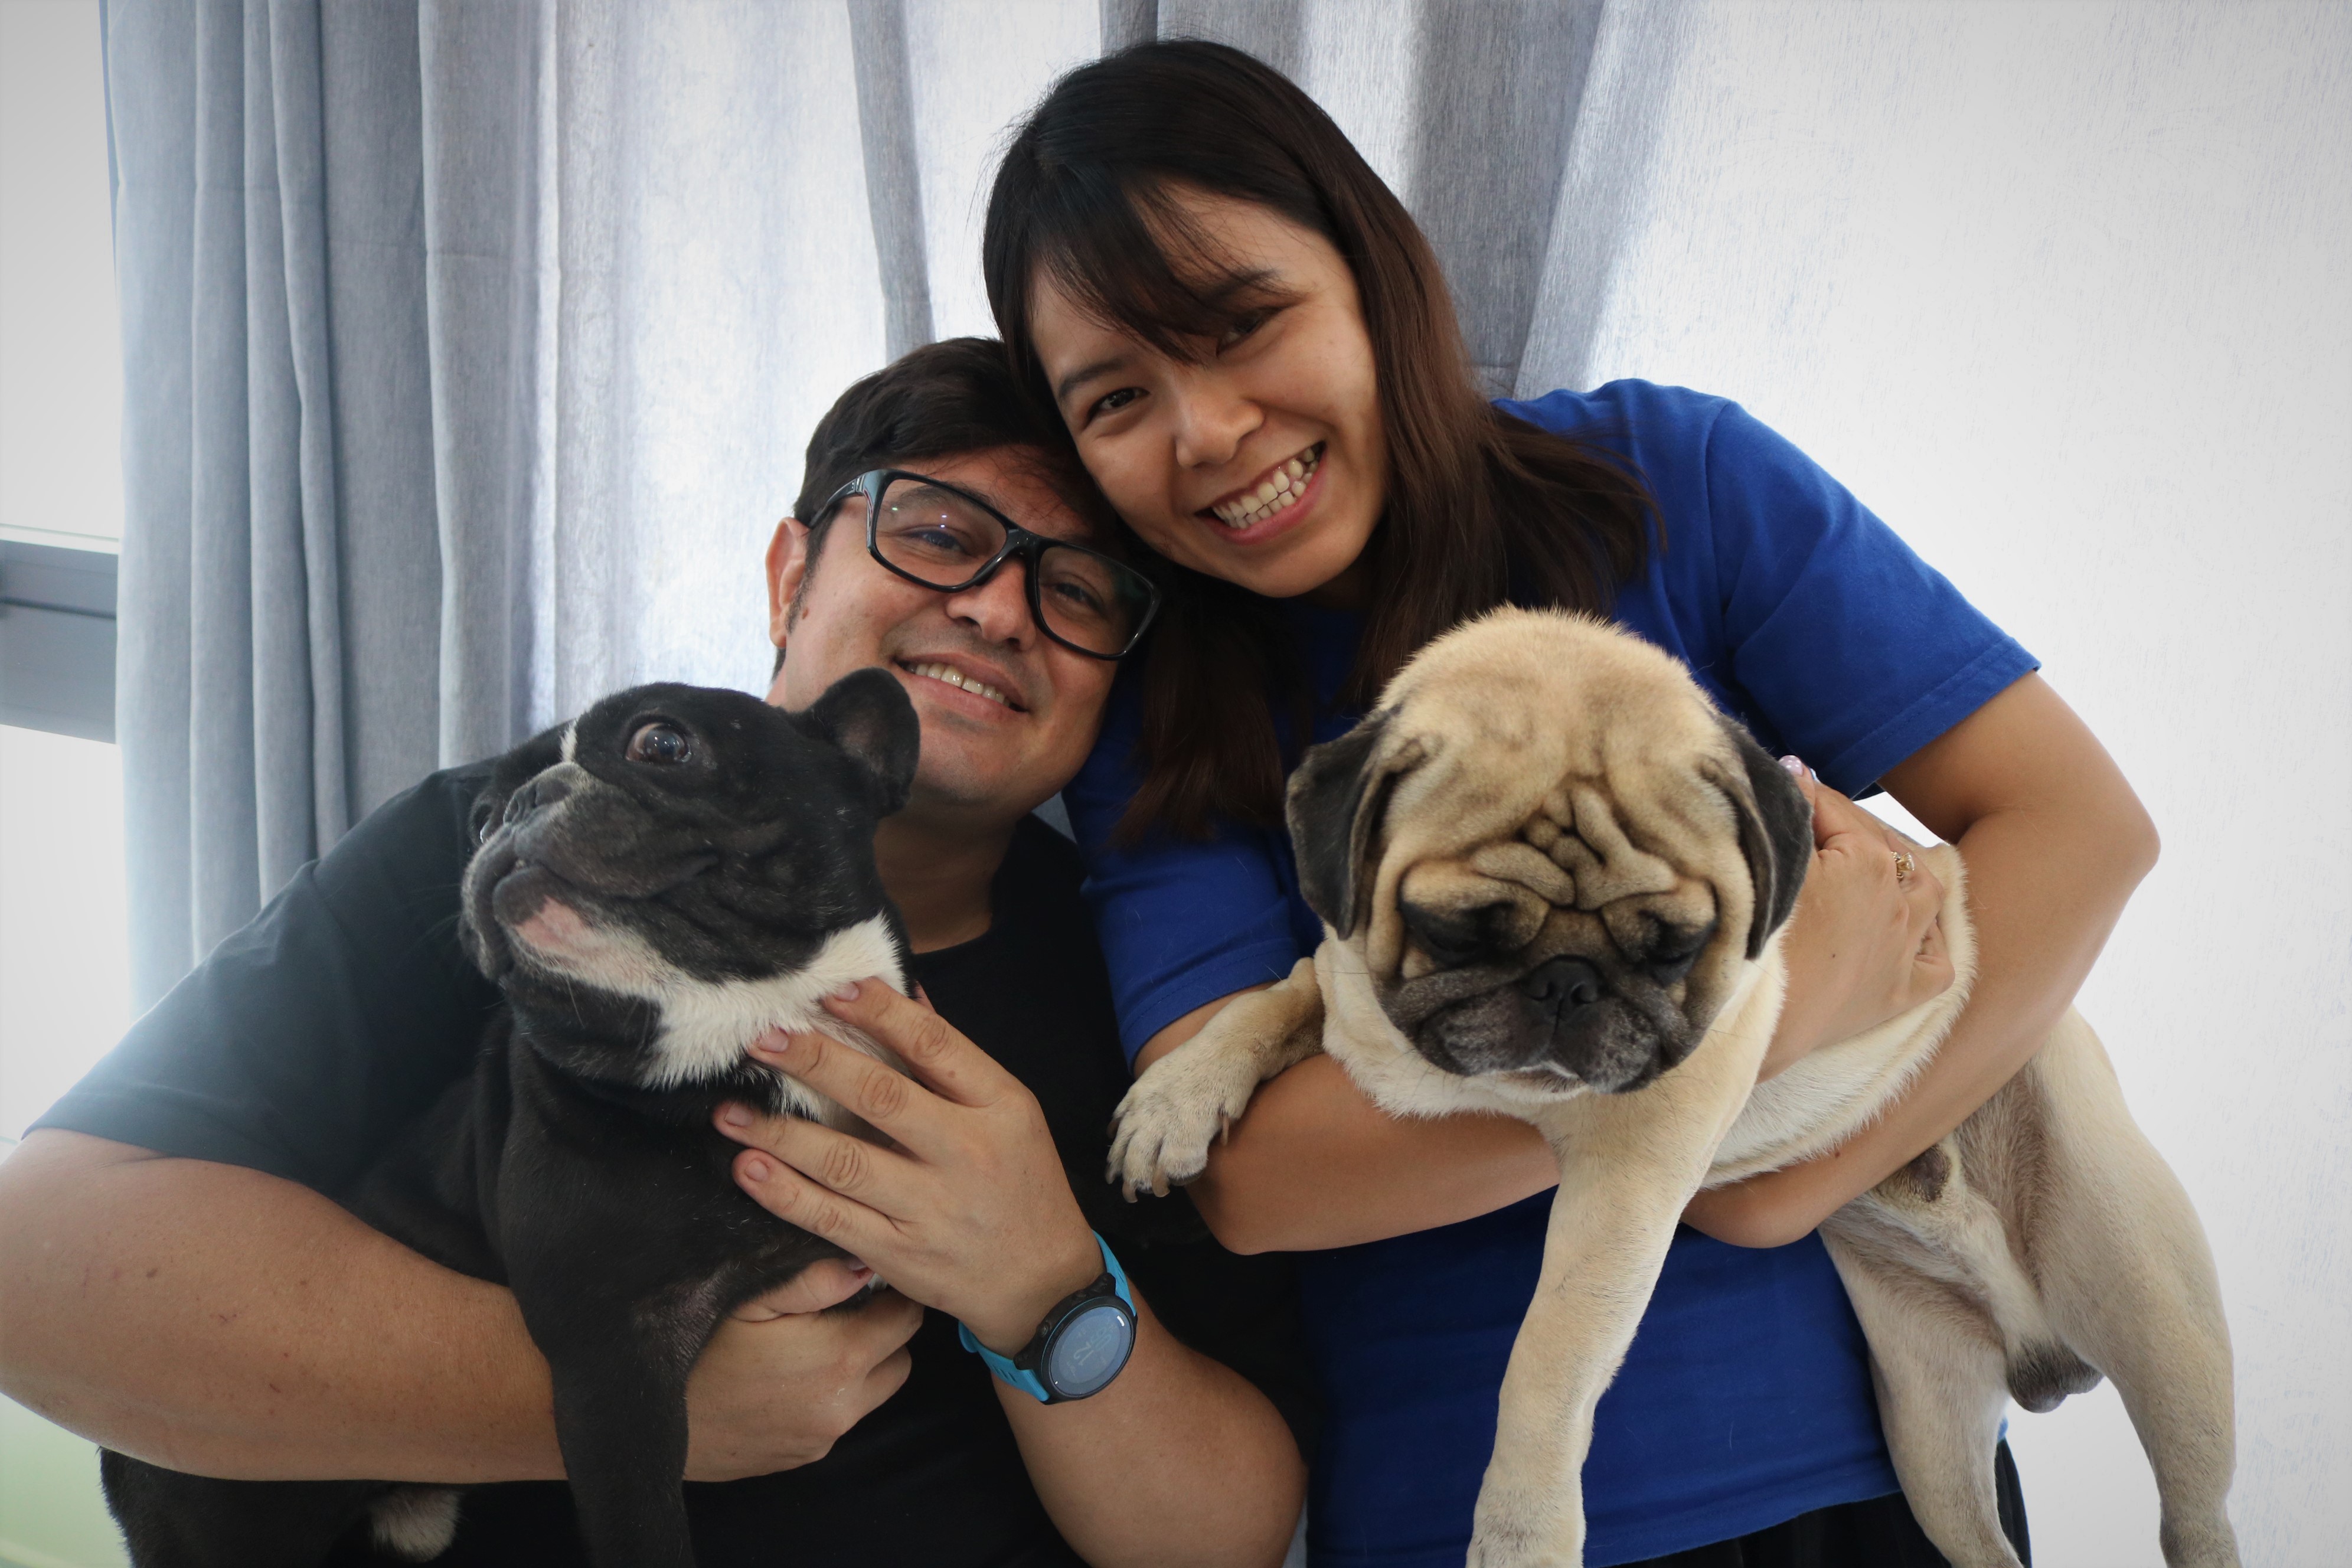 Oscar Fernando Ruiz Bonilla and wife Tran Anh Thu pose for a photo with their pets at their house in Ho Chi Minh City’s District 9 on October 19, 2021. Photo: Hoang An / Tuoi Tre